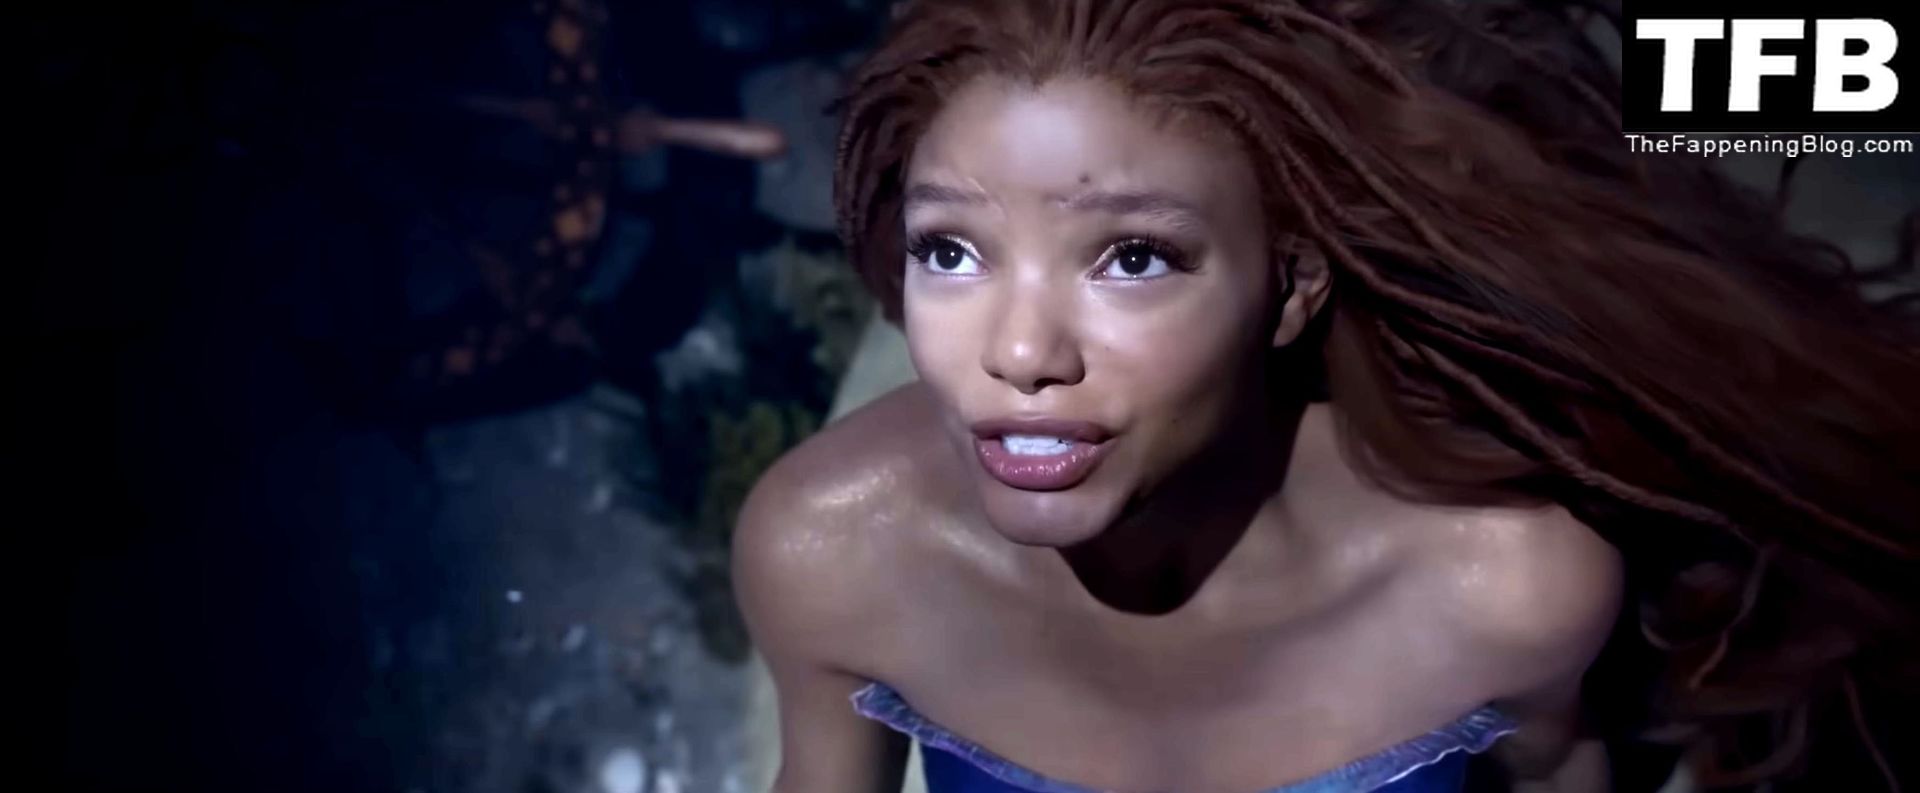 First look at Disney’s Live Action Teaser Trailer for “The Little Mermaid” Featuring Halle Bailey Singing a Classic (15 Pics + Video)